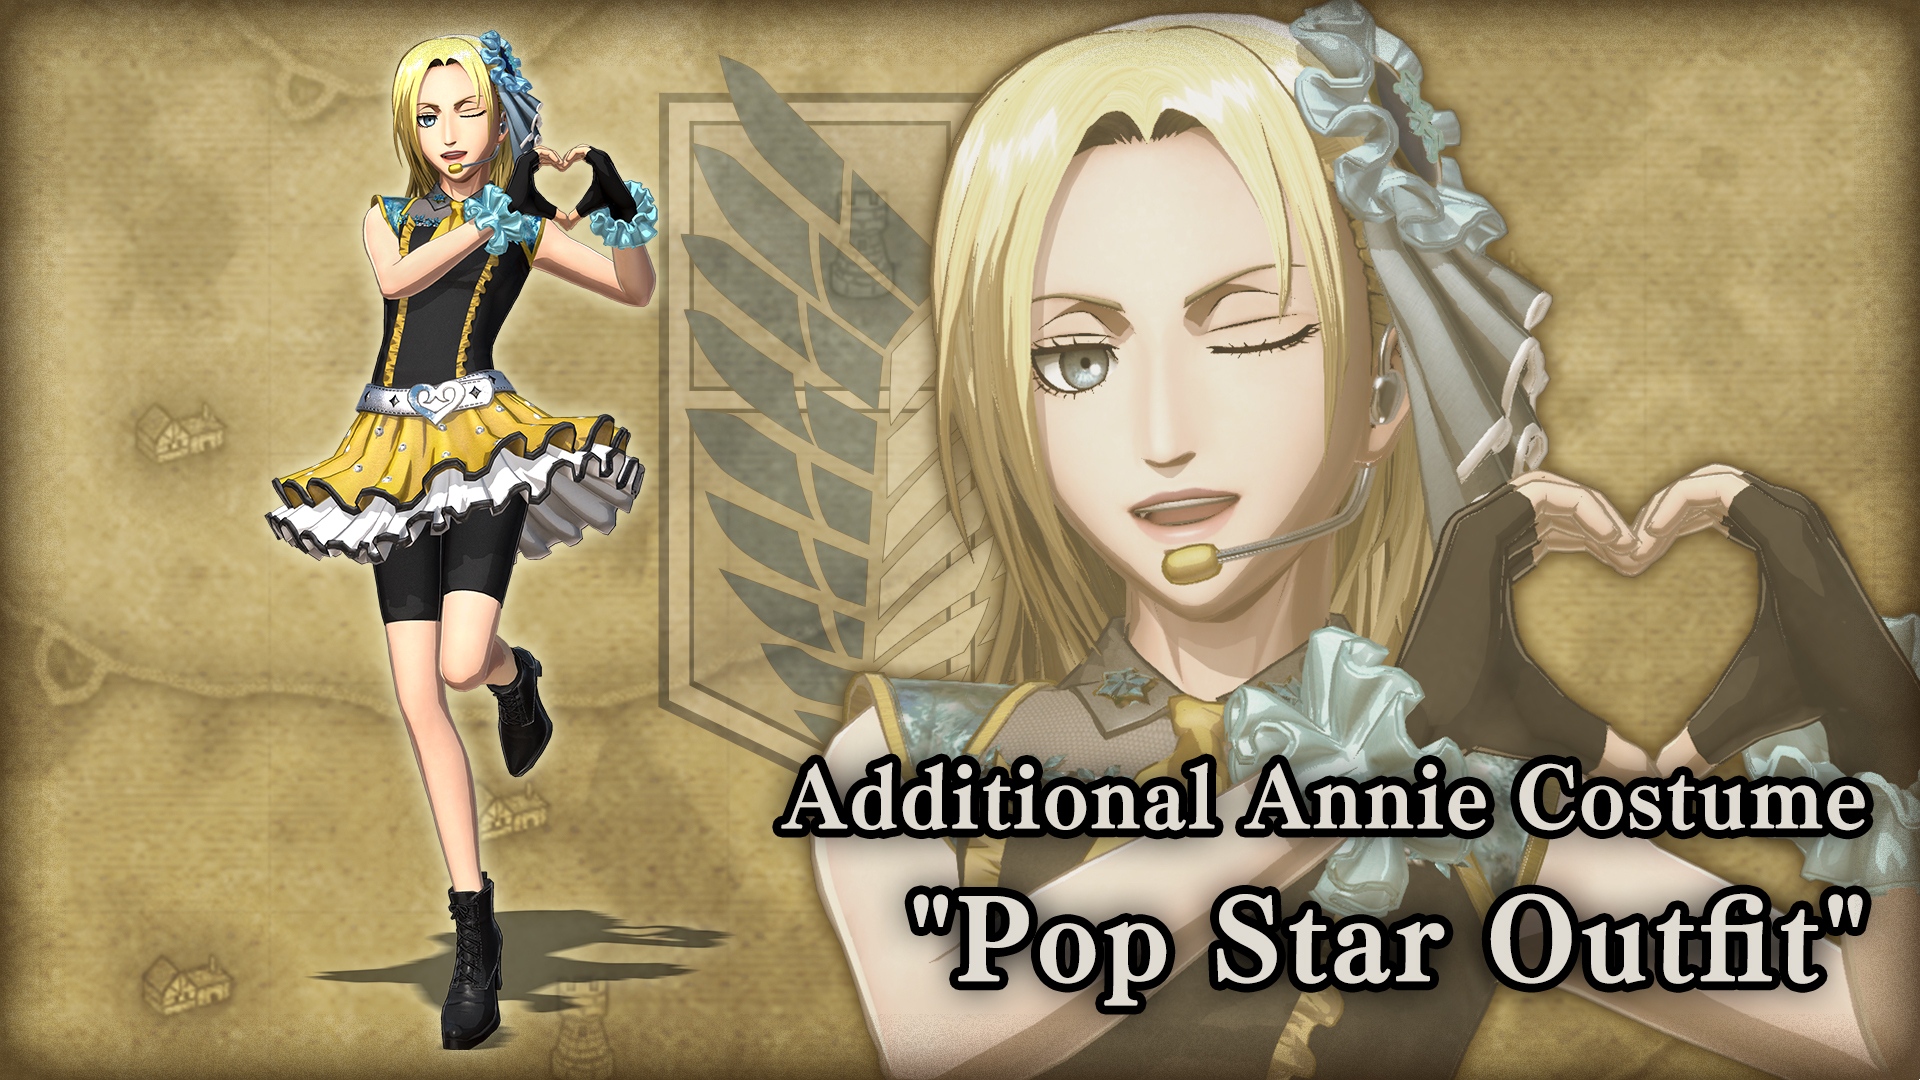 Additional Annie Costume: "Pop Star Outfit"